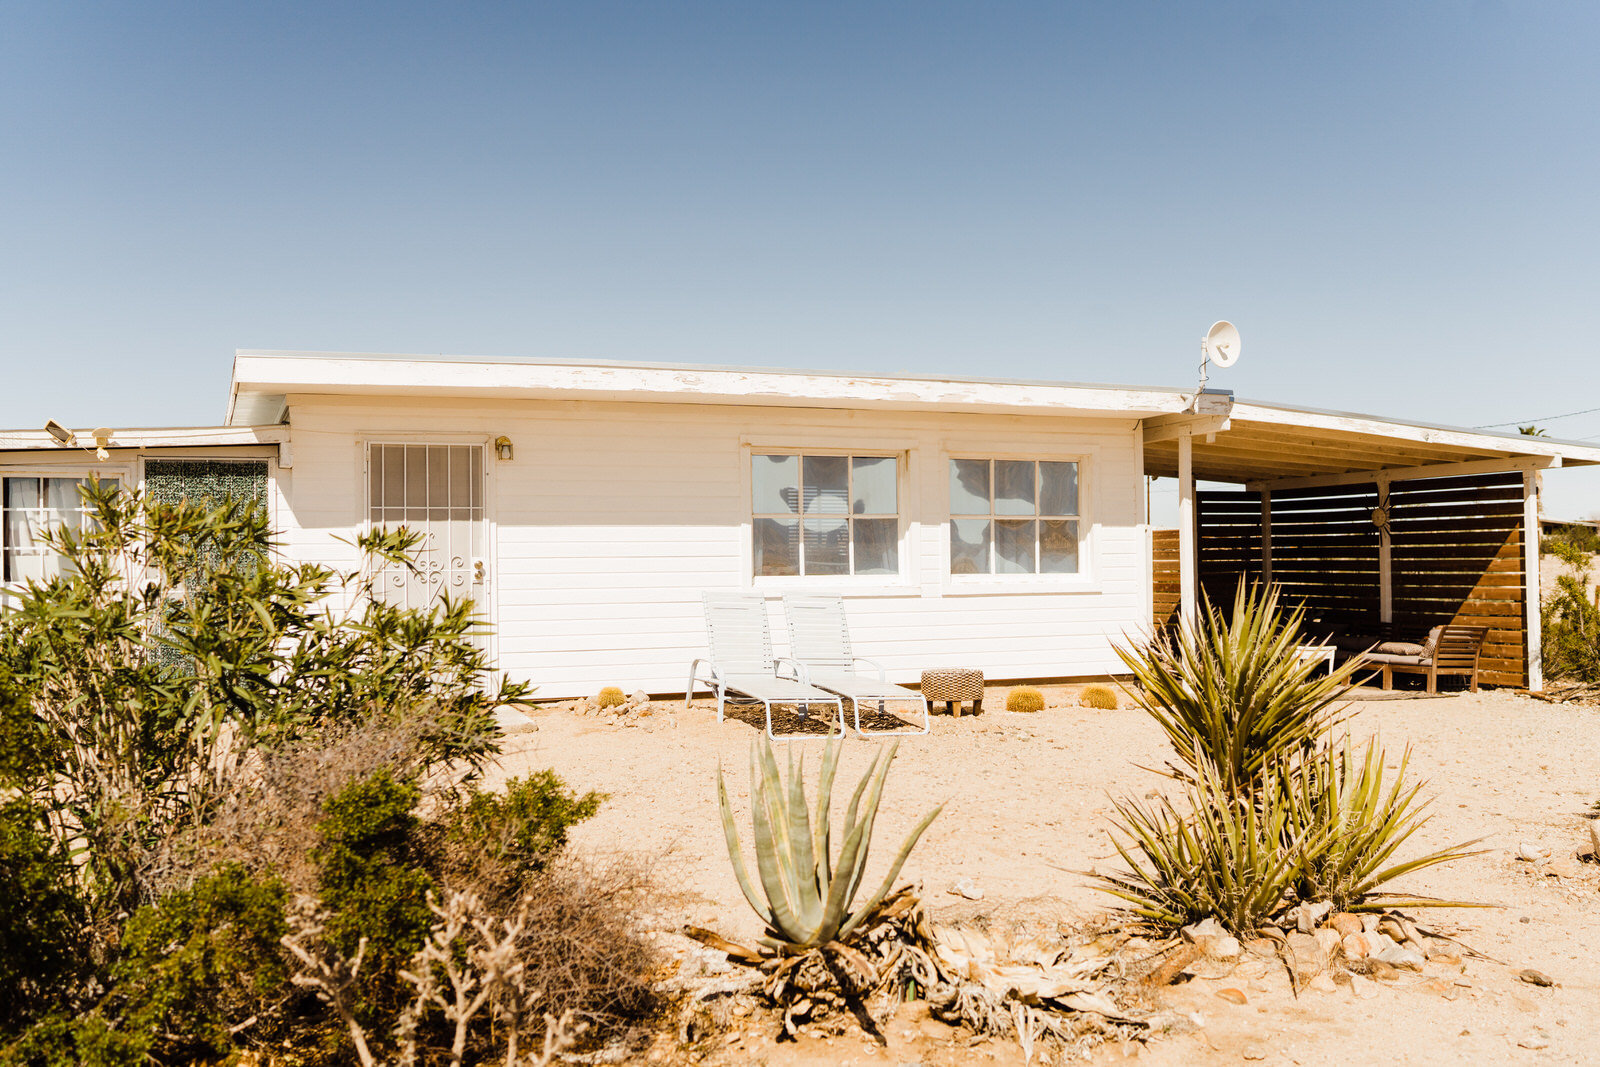 Tiny Home airbnb in Joshua Tree perfect for eloping couples | photo by Kept Record | www.keptrecord.com